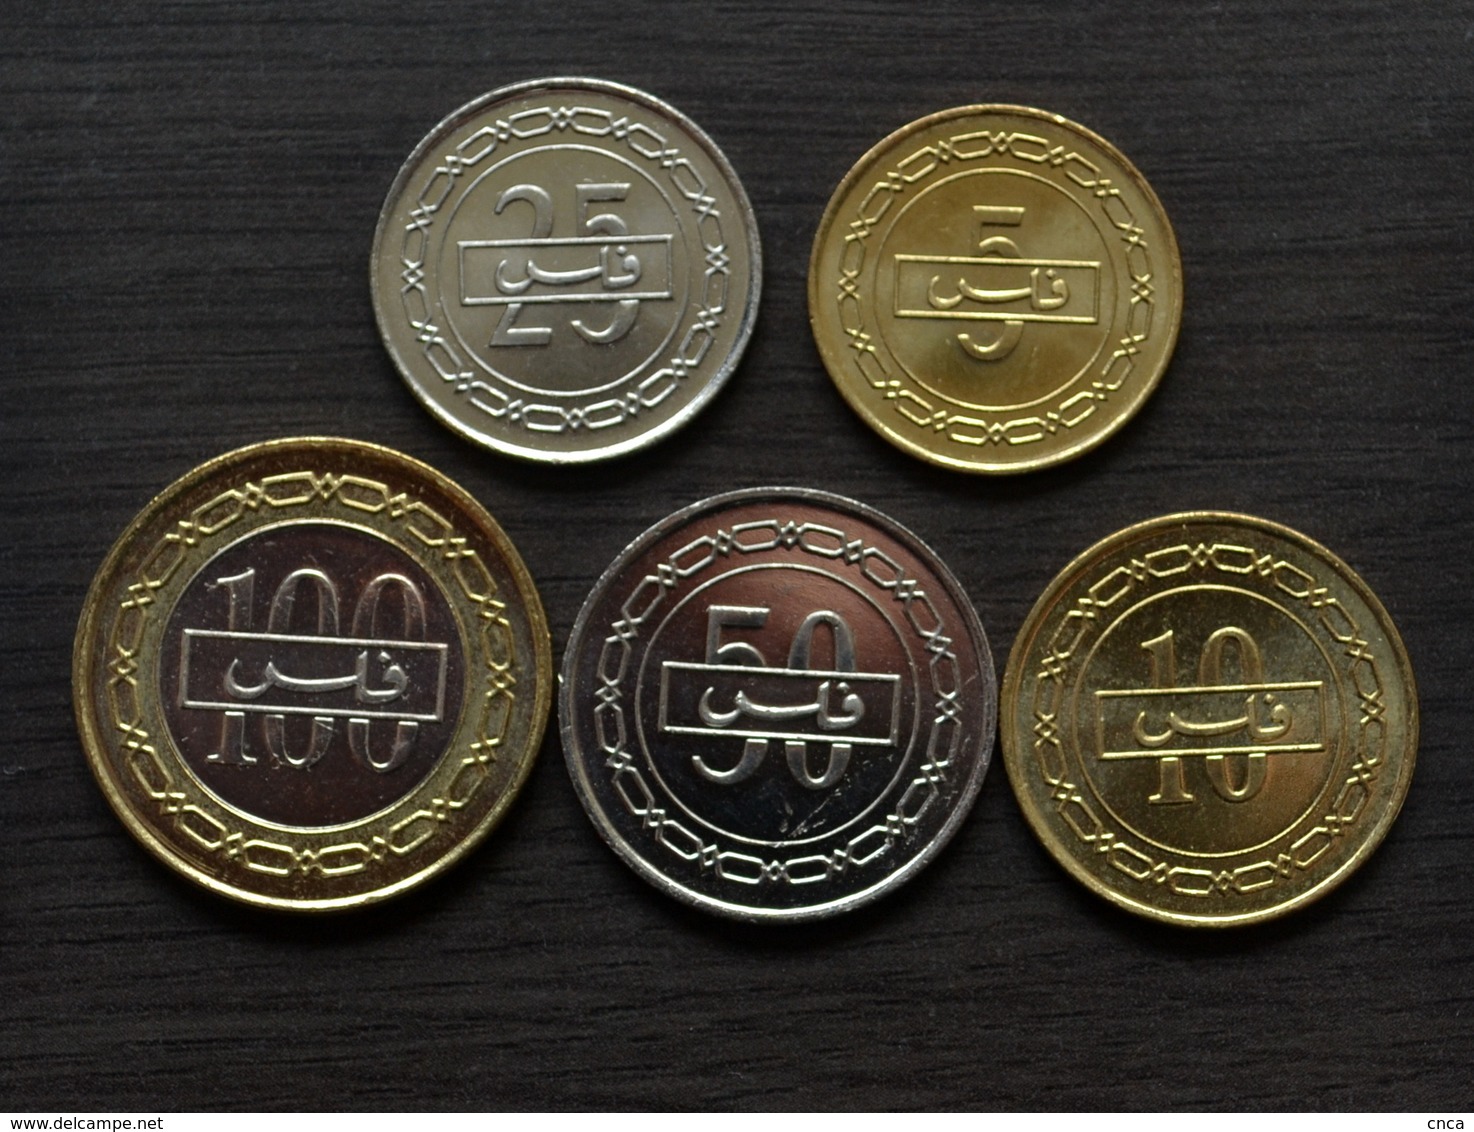 Bahrain 1 SET OF 5 COINS 5+10+25+50+100 UNC COIN MIDDLE EAST CURRENCY - Bahrein